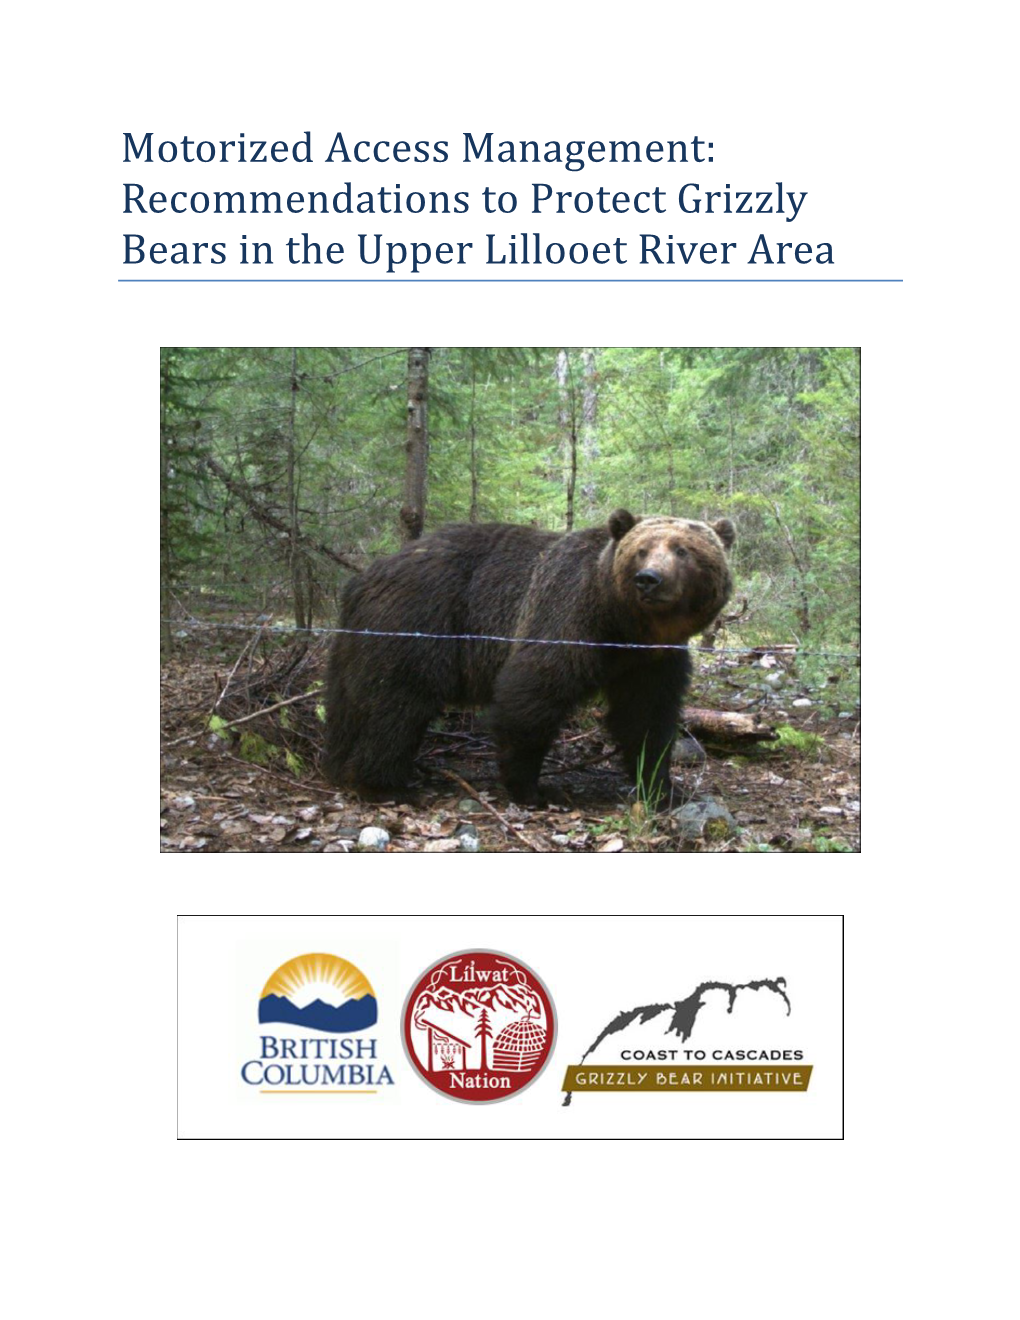 Recommendations to Protect Grizzly Bears in the Upper Lillooet River Area